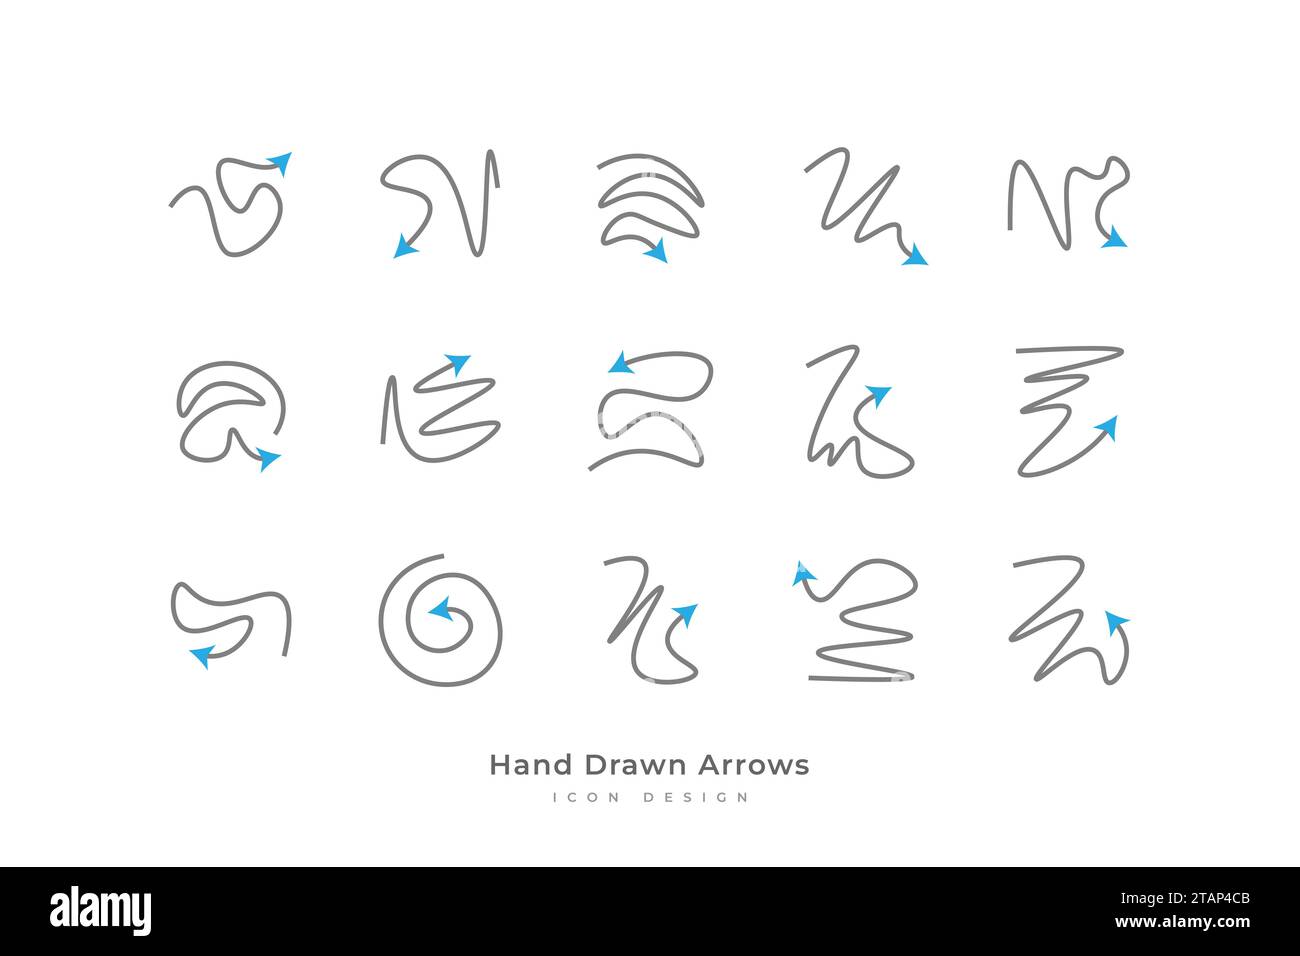 Set of Curved Arrow Icon with Hand Drawn Style Stock Vector